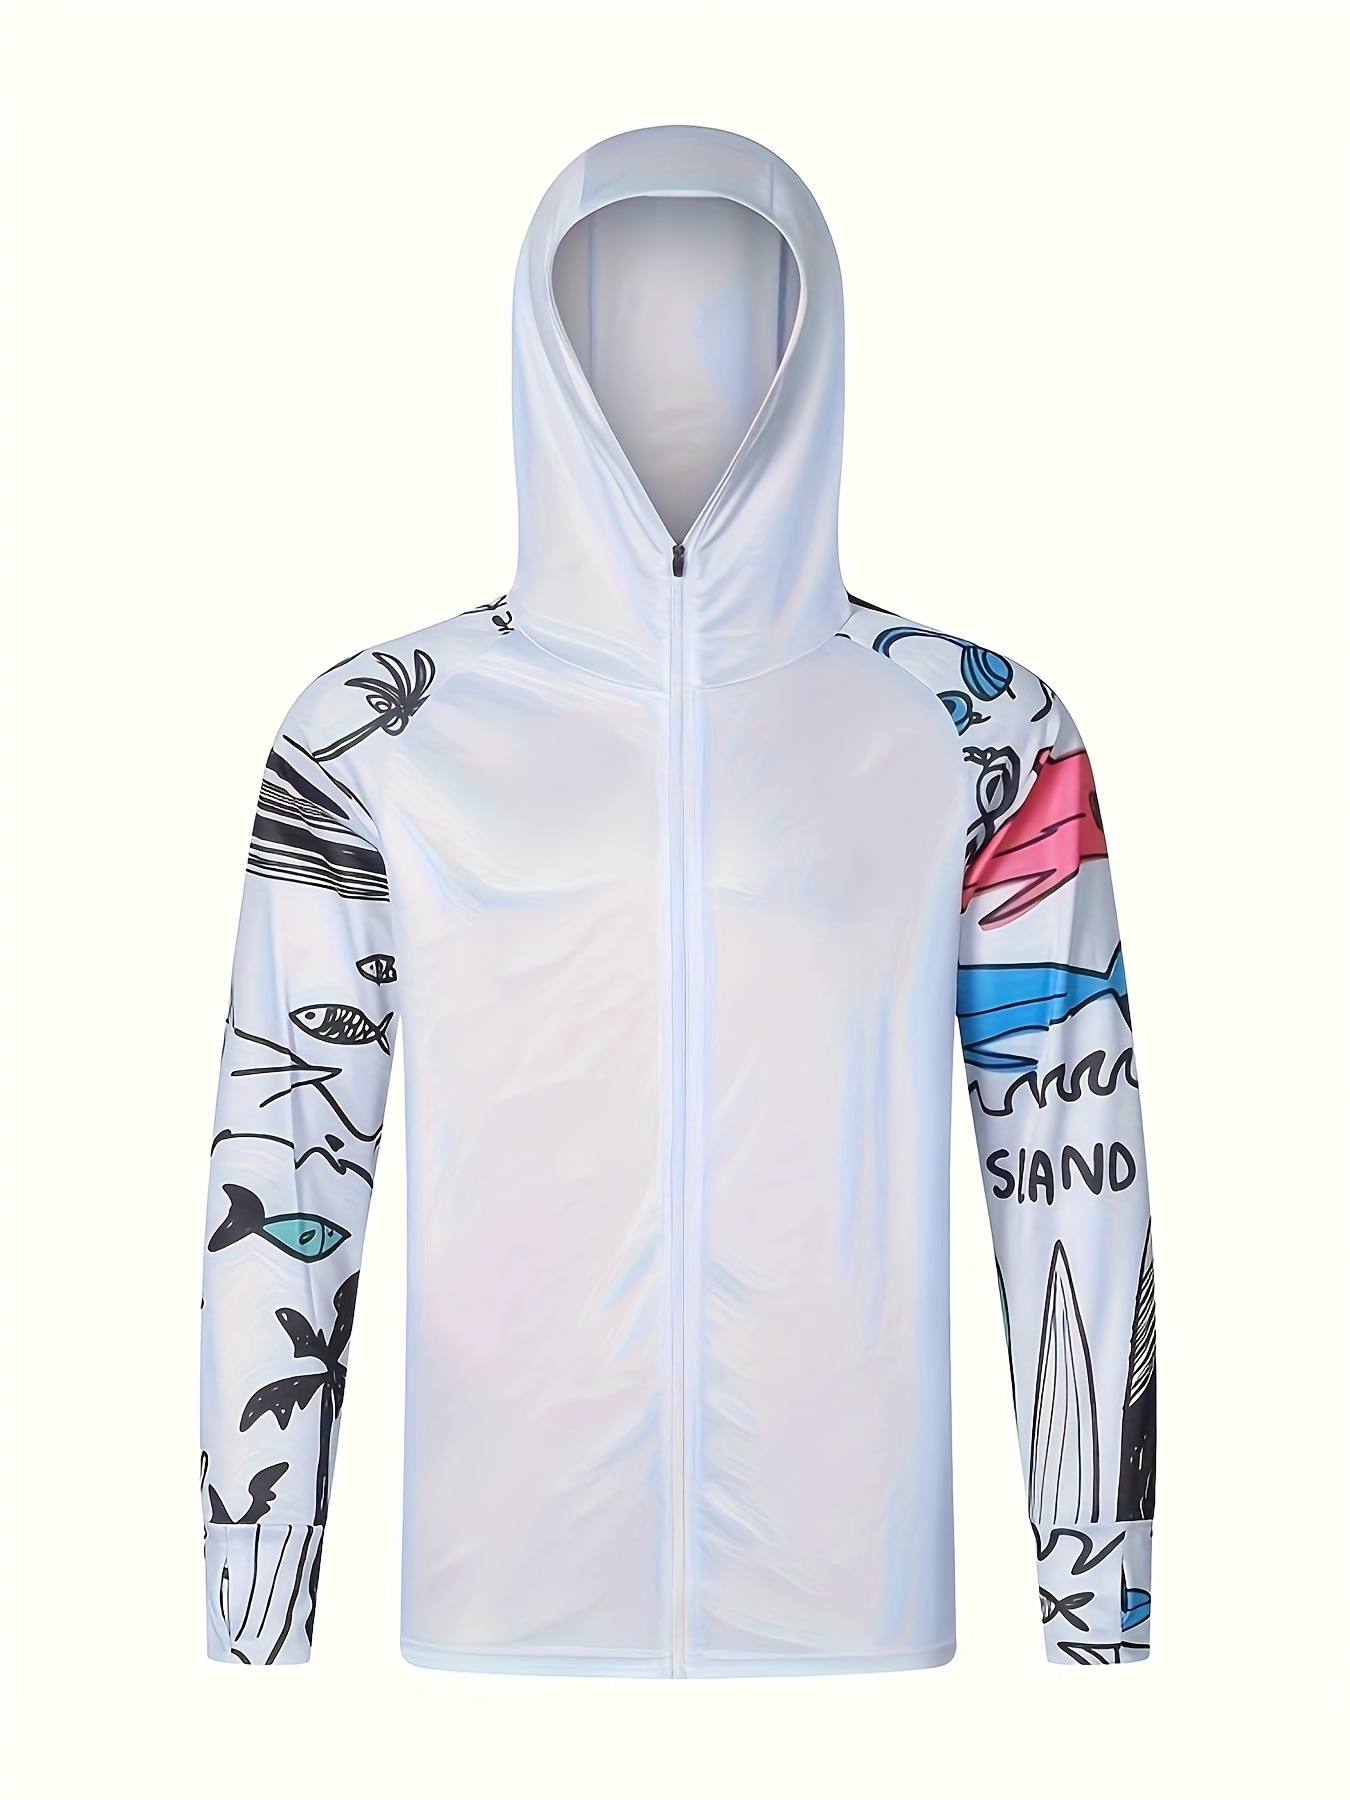 Men's Raglan Sleeve With Fish Pattern Jacket, Anti-UV Sunscreen Sun Protection Fishing Hoodie Breathable Quick Dry Hooded Fishing Jersey For